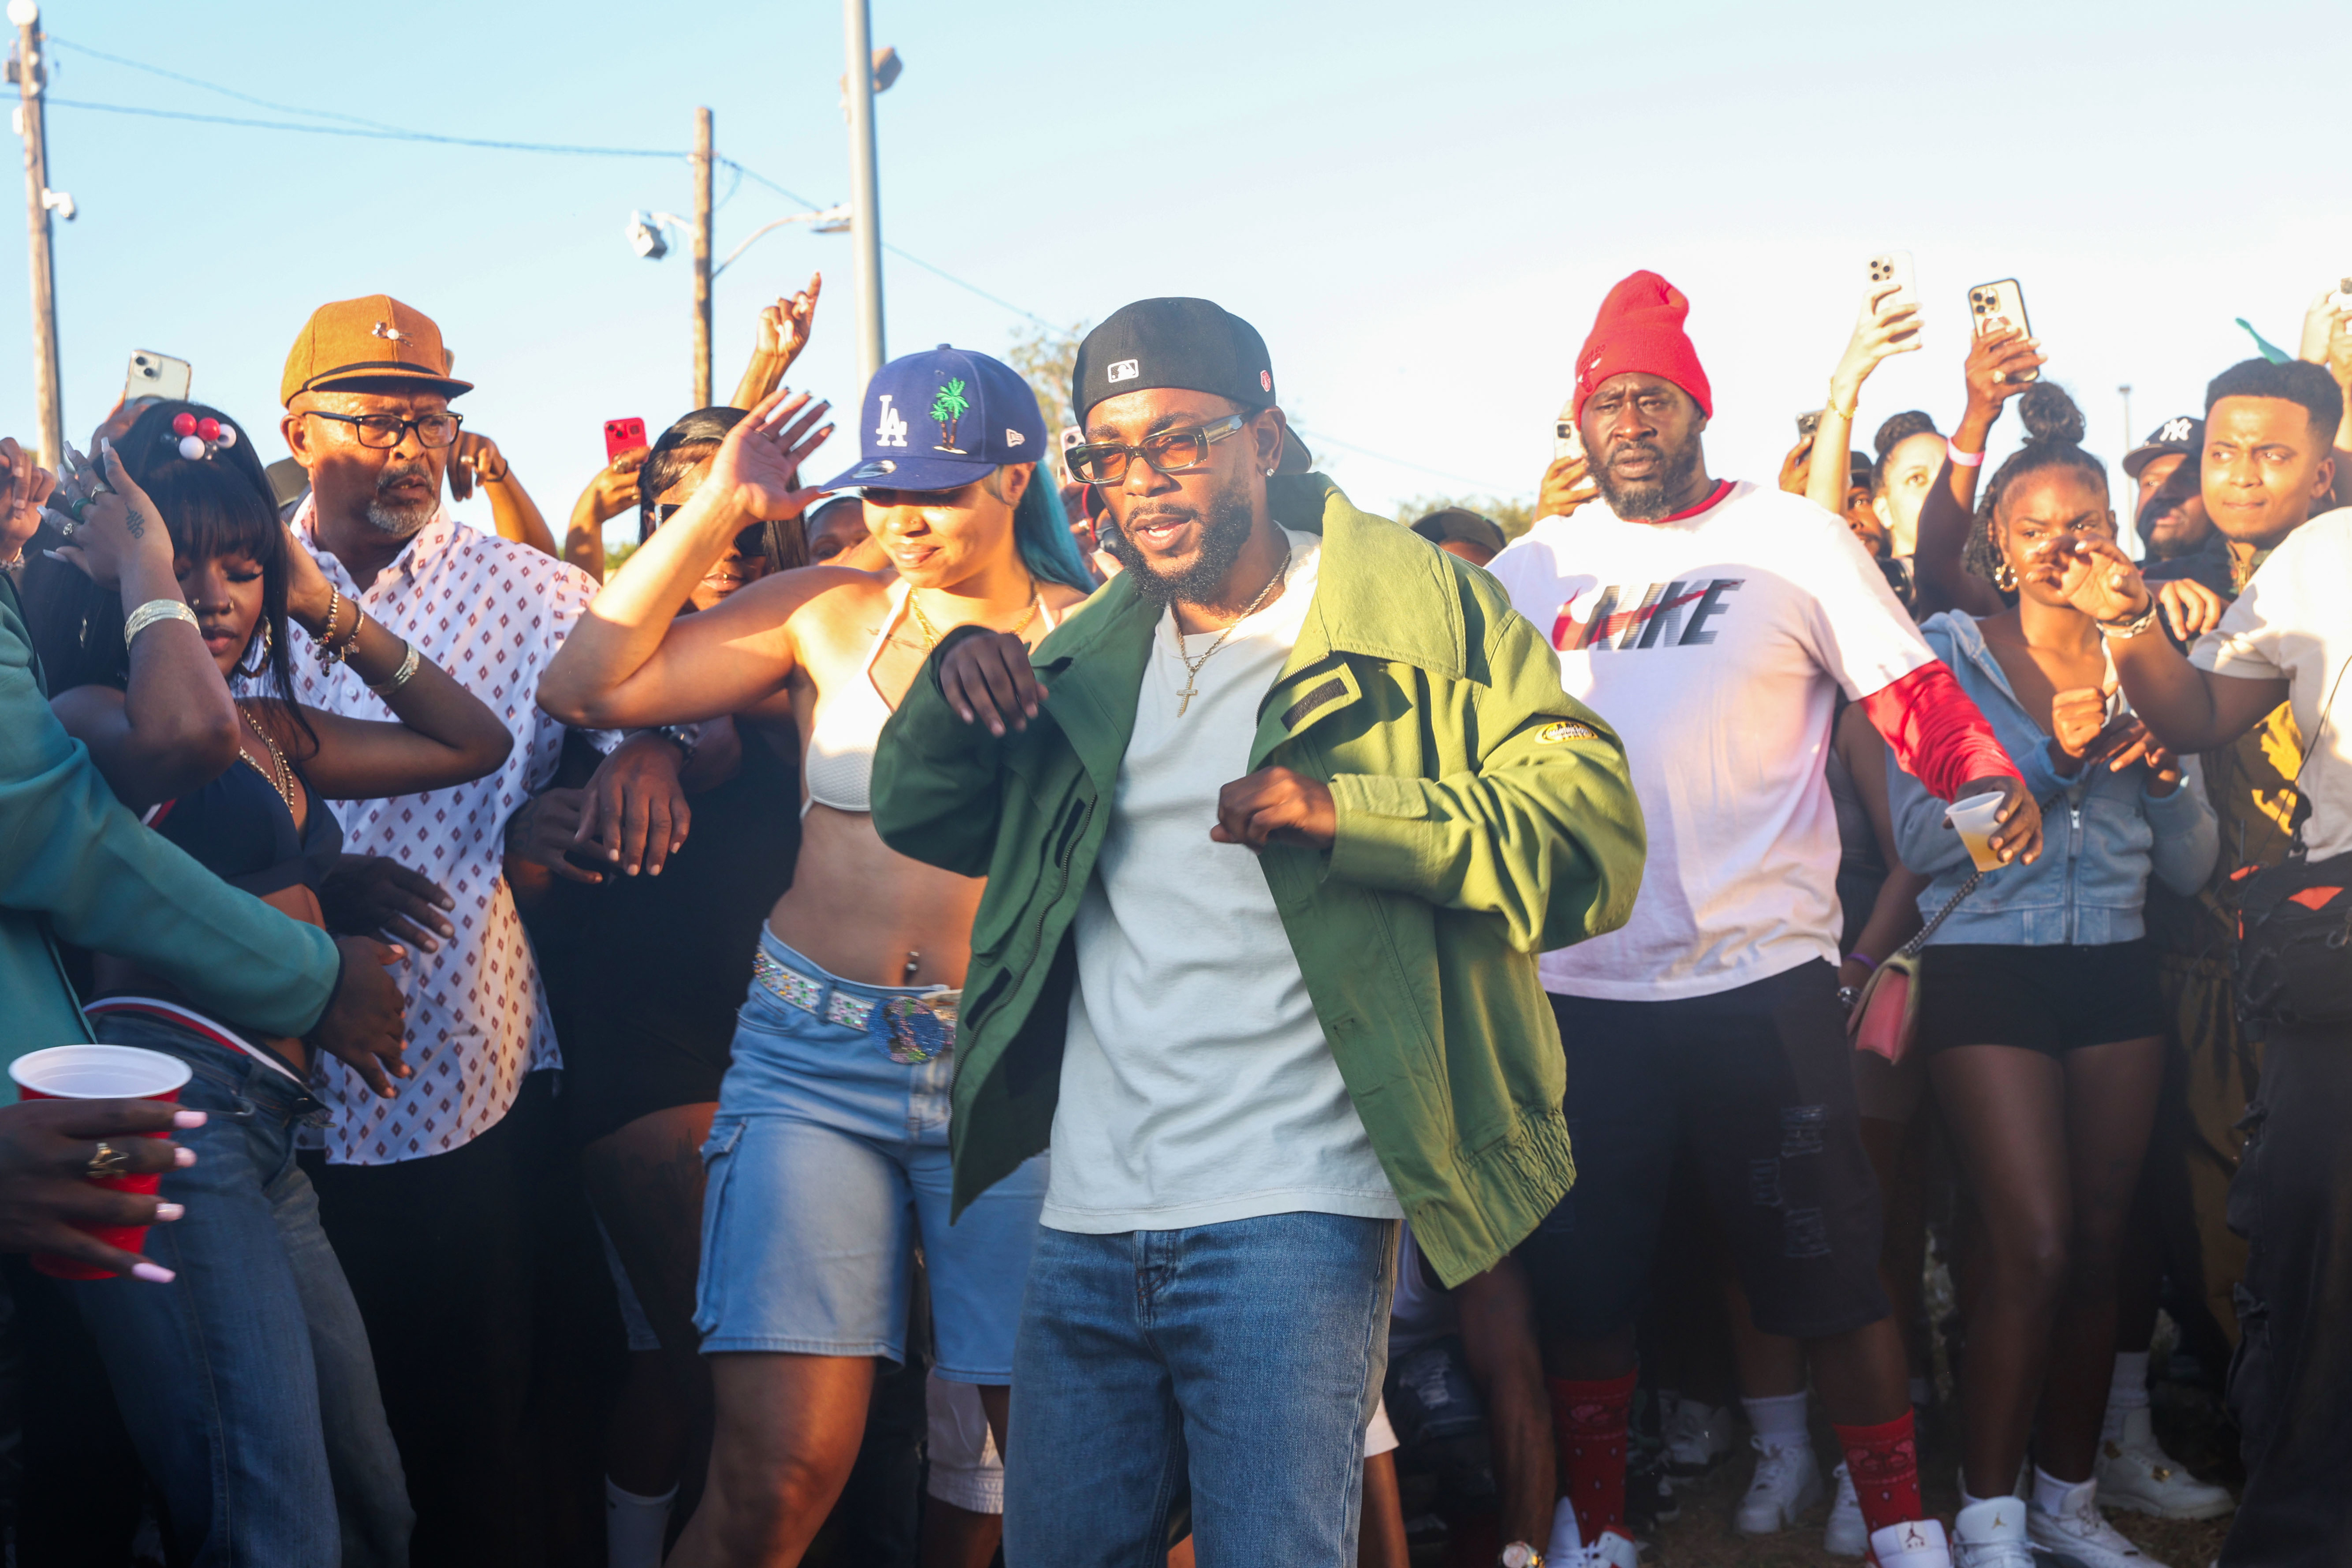 Kendrick Lamar dances in a crowd at an outdoor gathering. Lamar wears a green jacket, white shirt, and black cap. People around him take photos and enjoy the moment